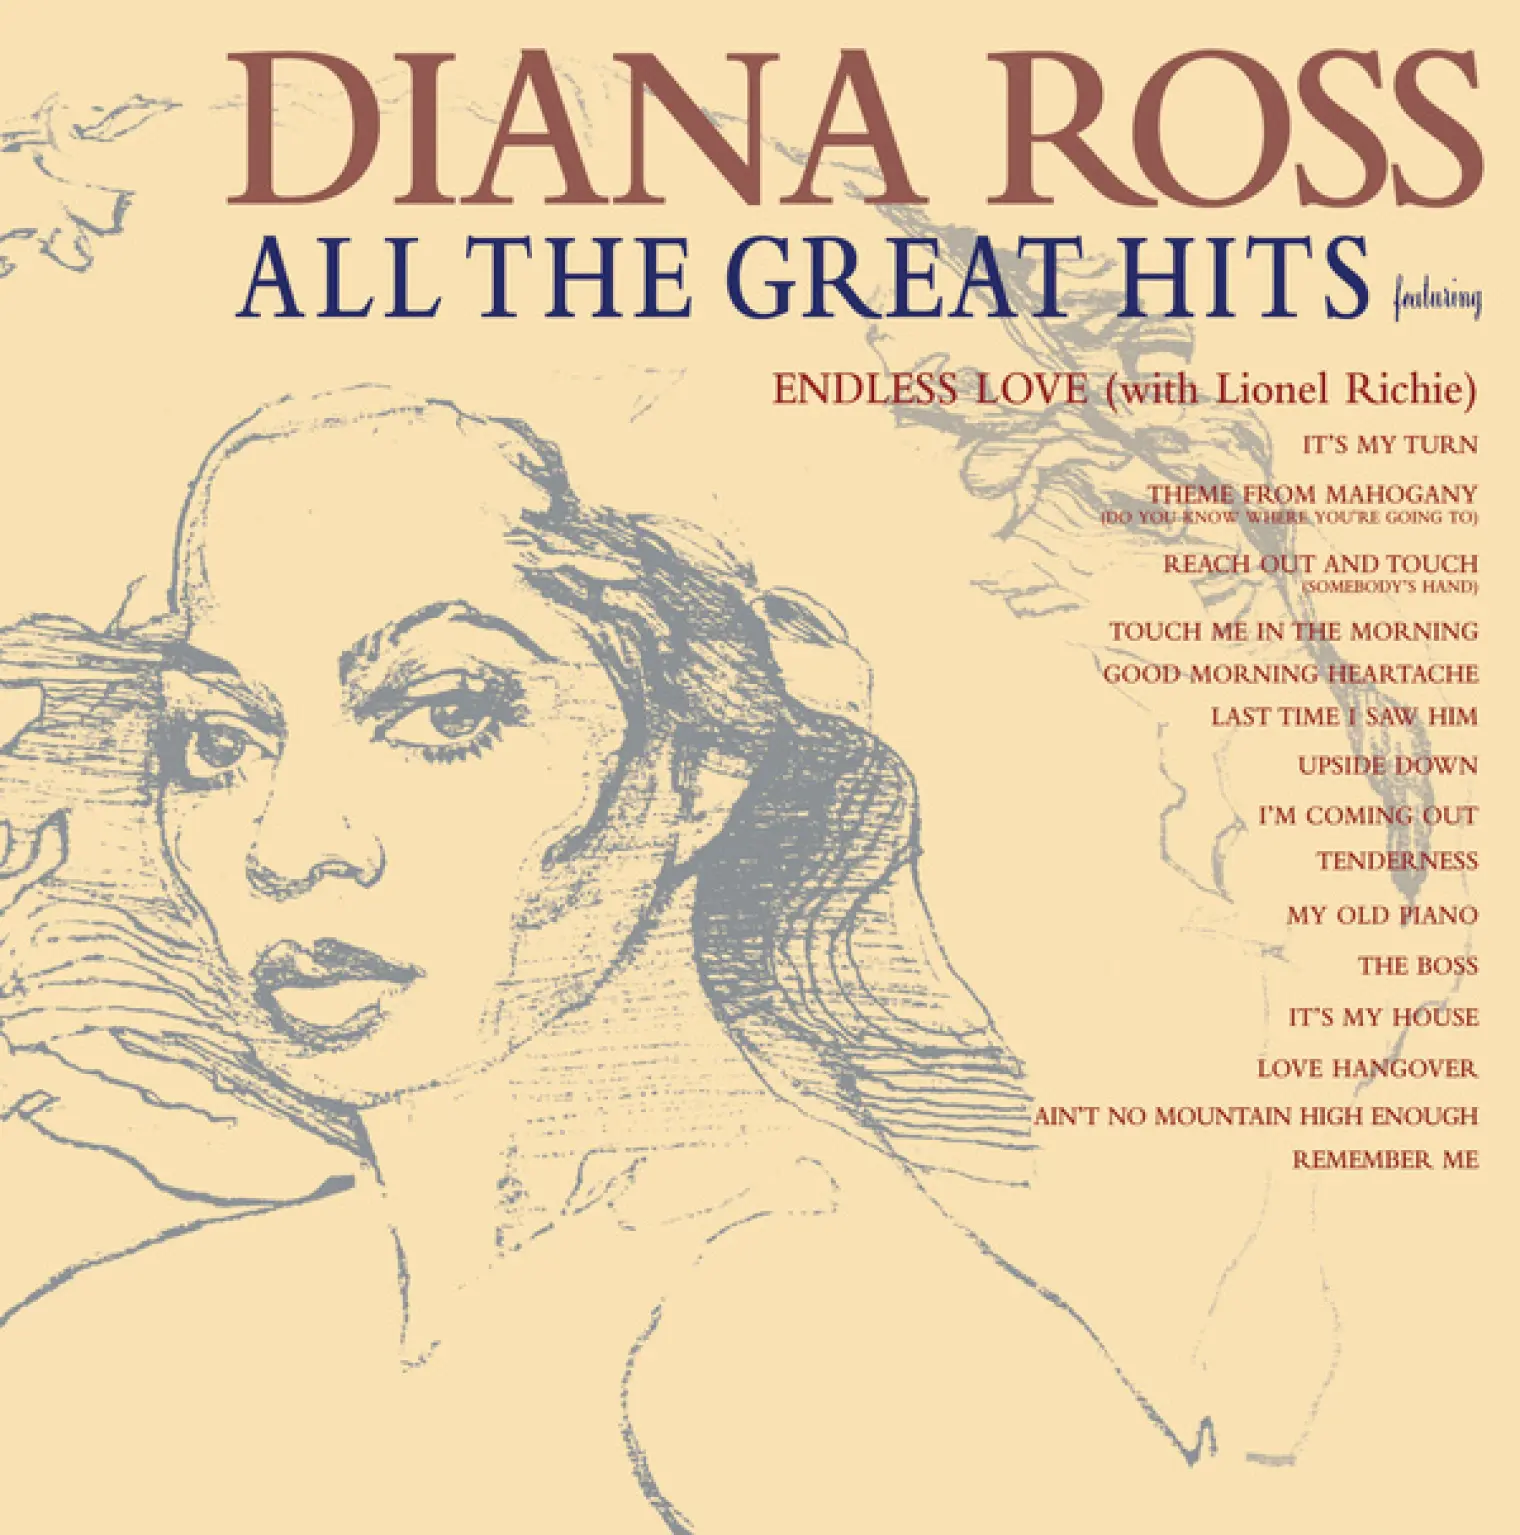 All The Great Hits -  Diana Ross 